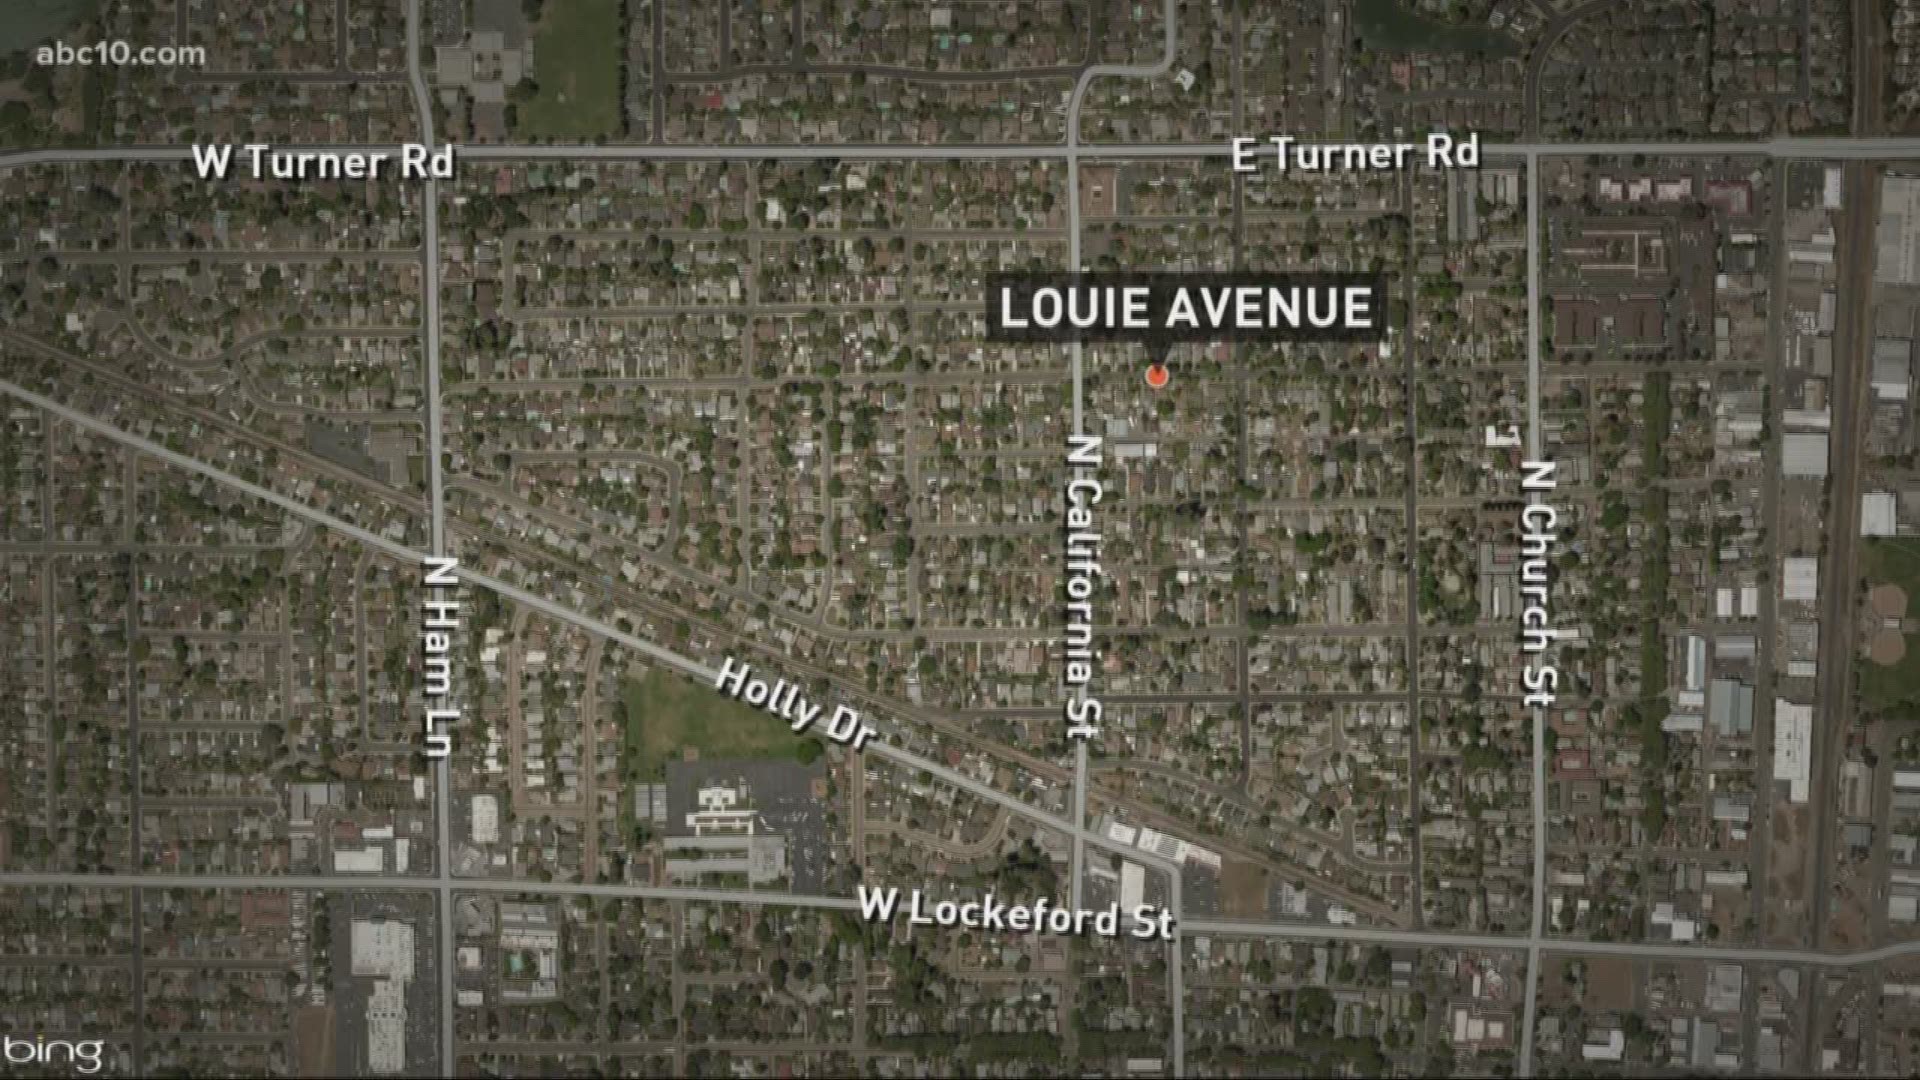 One person was killed while another was injured during a shooting in Lodi early Sunday morning, according to the Lodi Police Department.